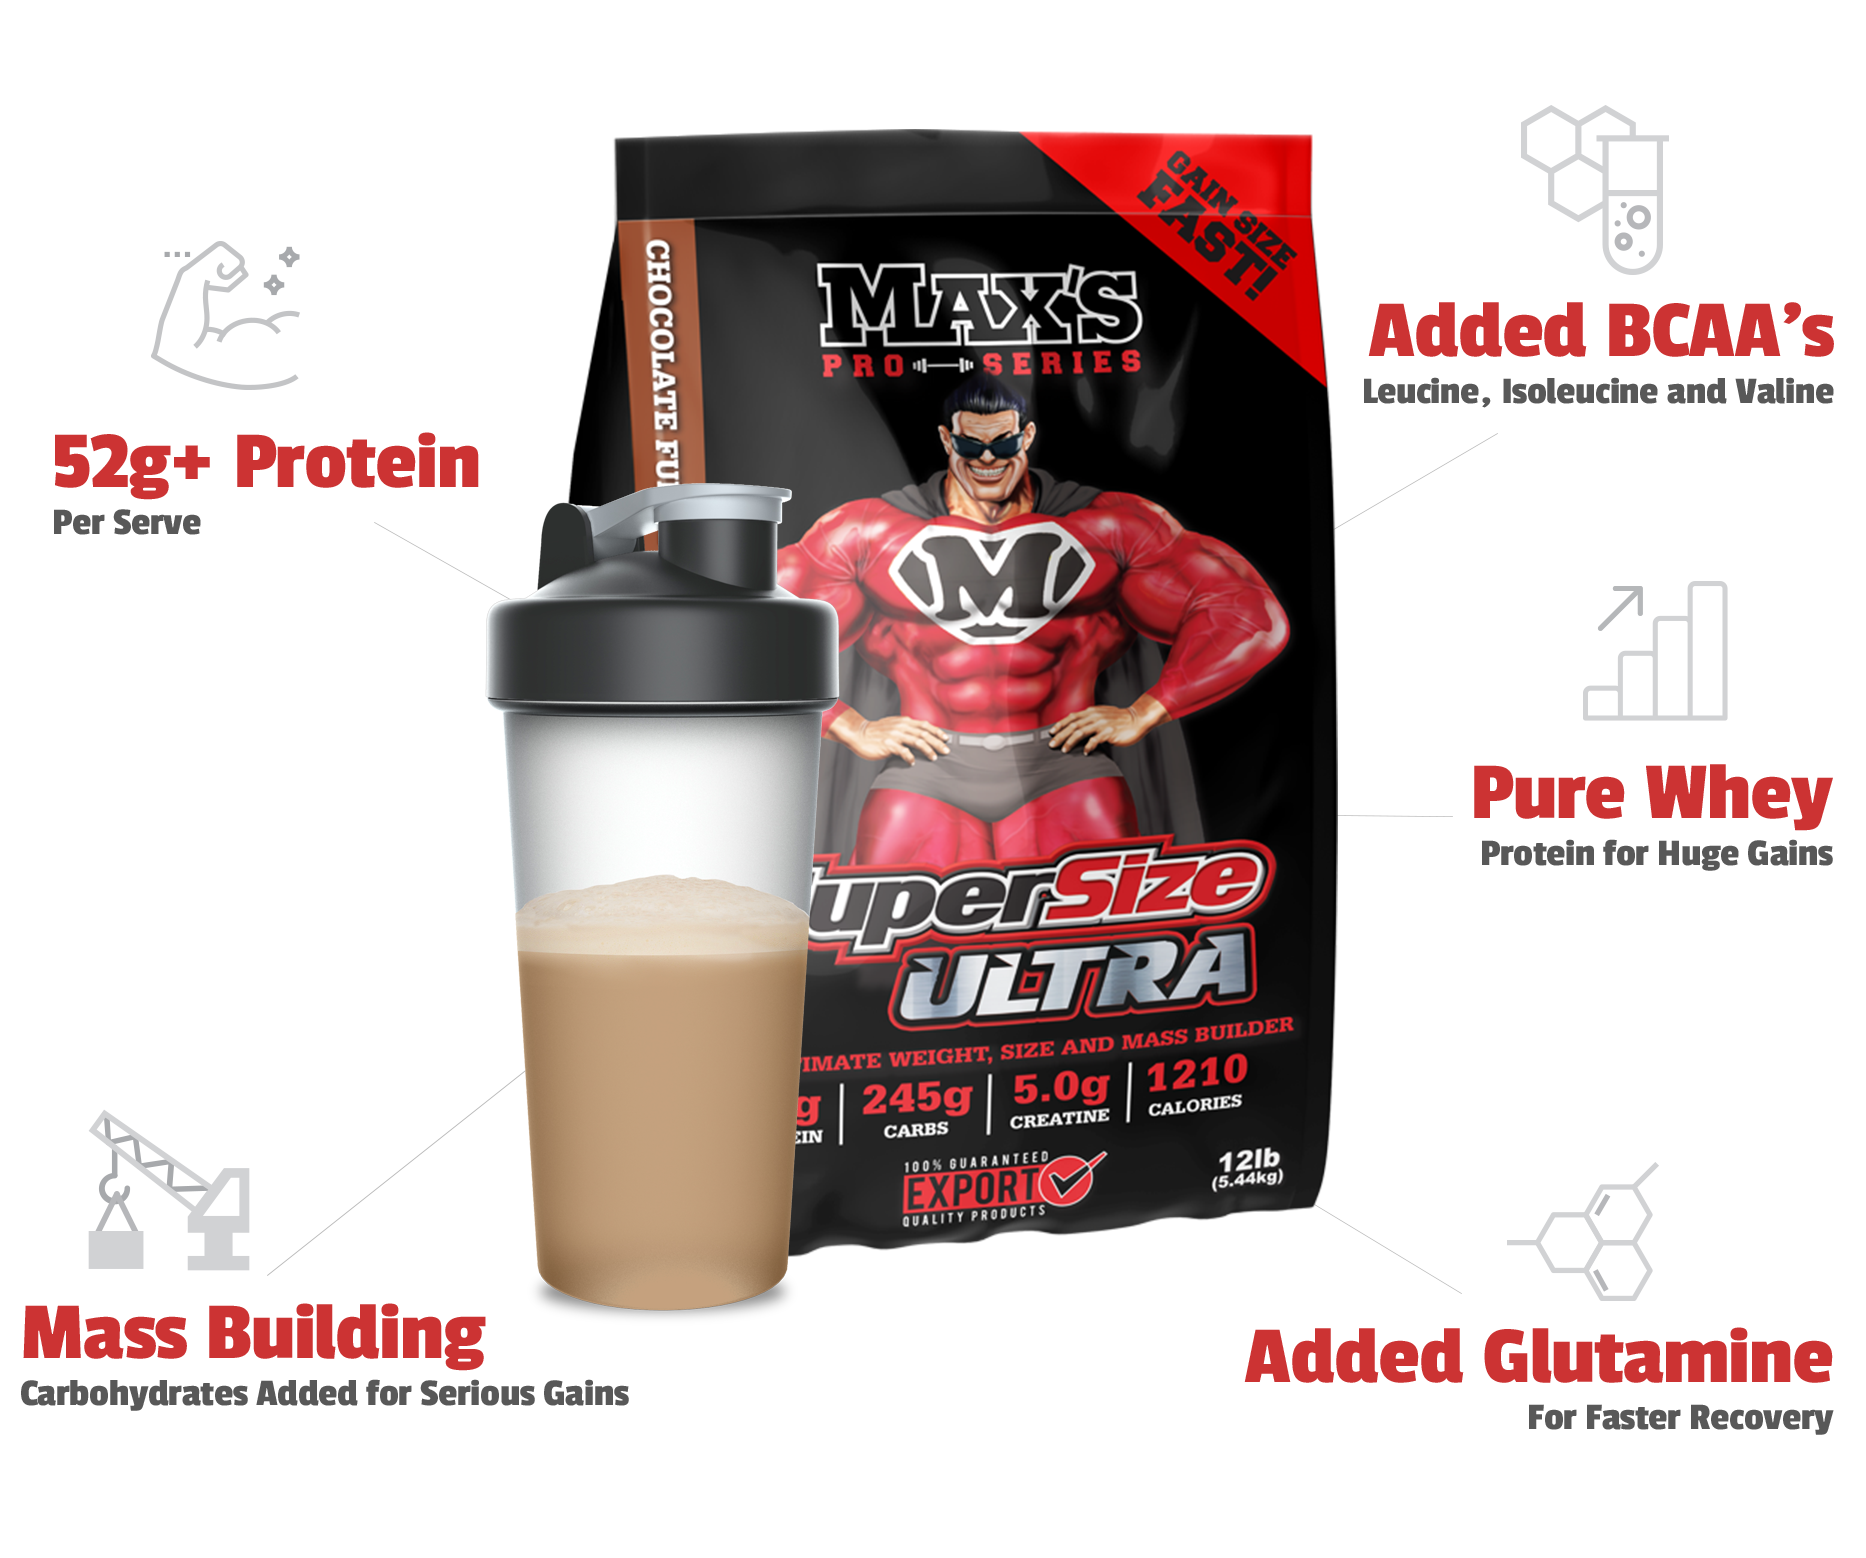 Max's Protein Supersize ultra mass gainer info